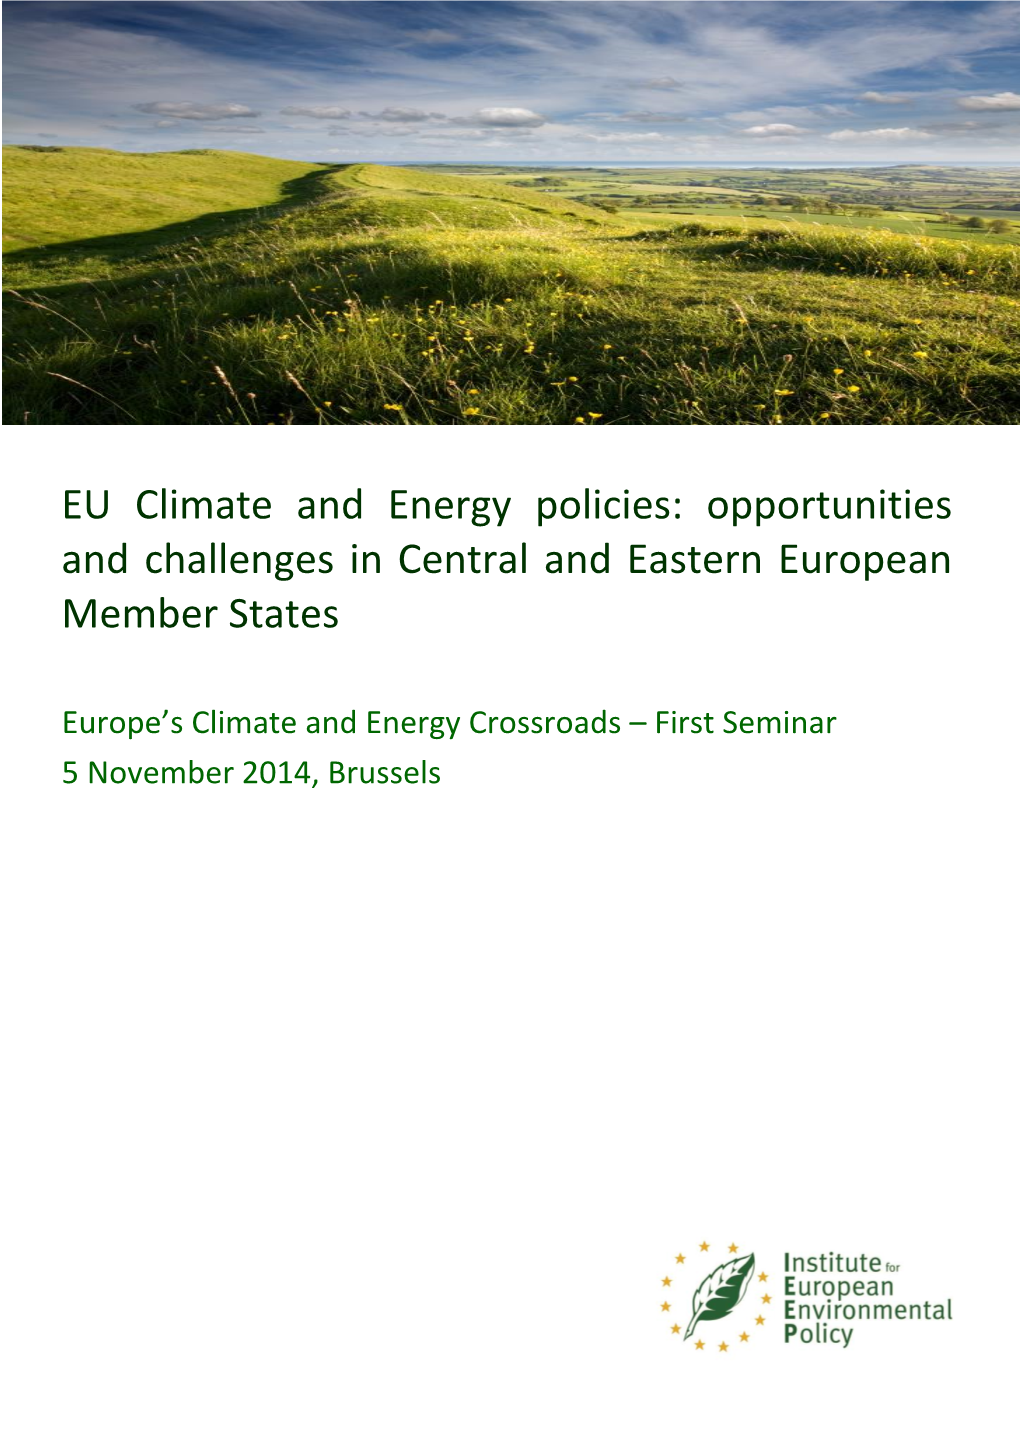 EU Climate and Energy Policies: Opportunities and Challenges in Central and Eastern European Member States